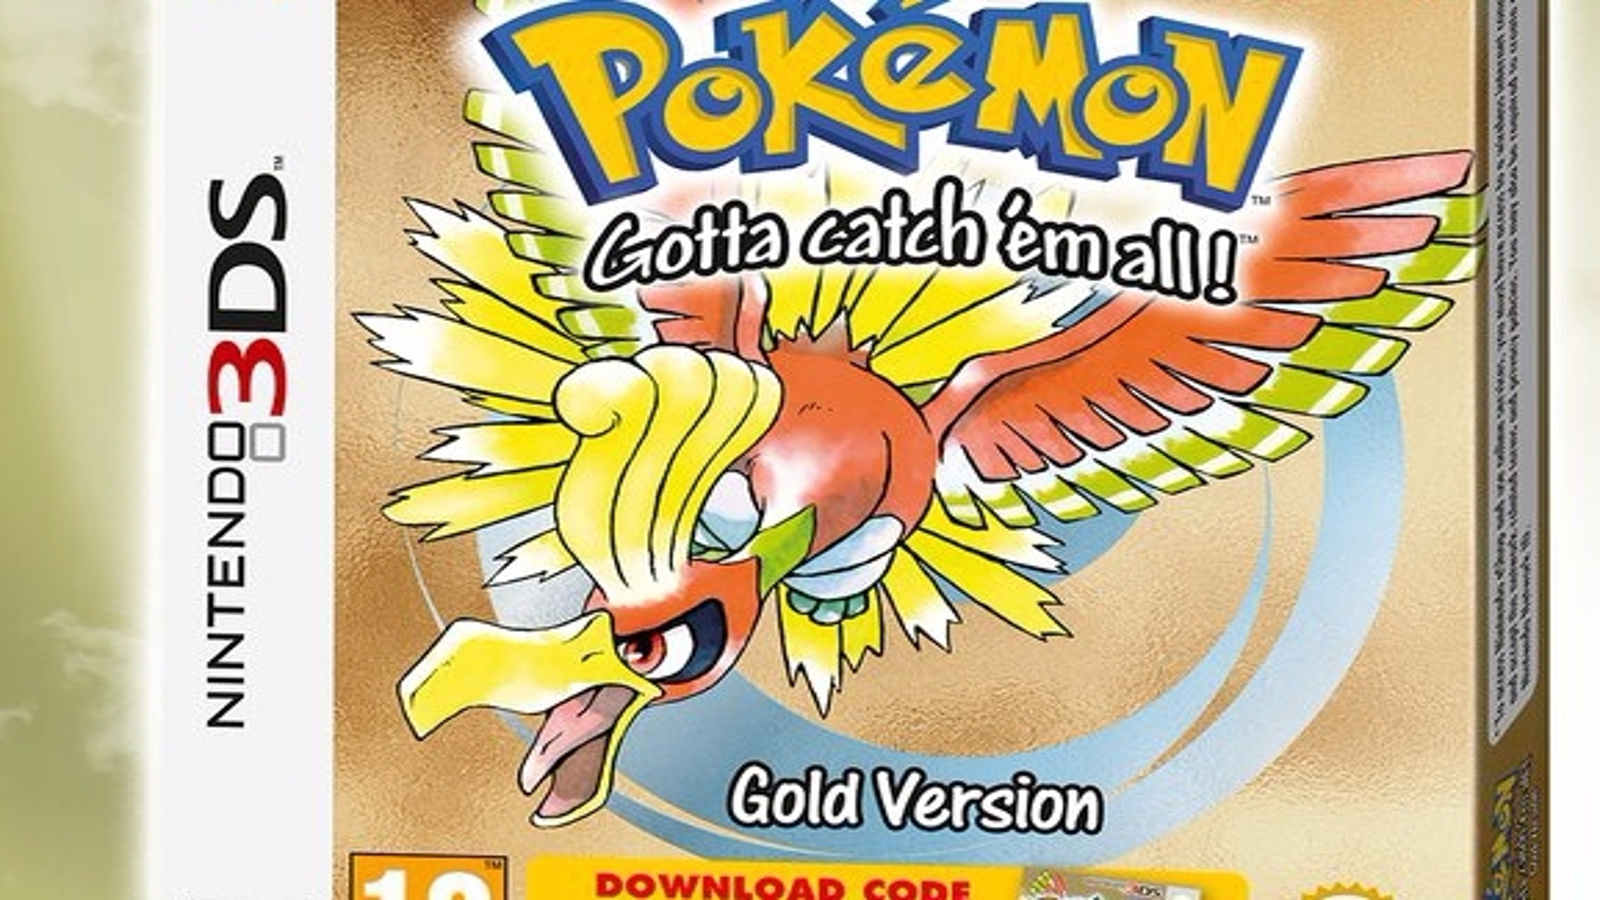 Pokémon Gold and get boxed release on 3DS | Eurogamer.net